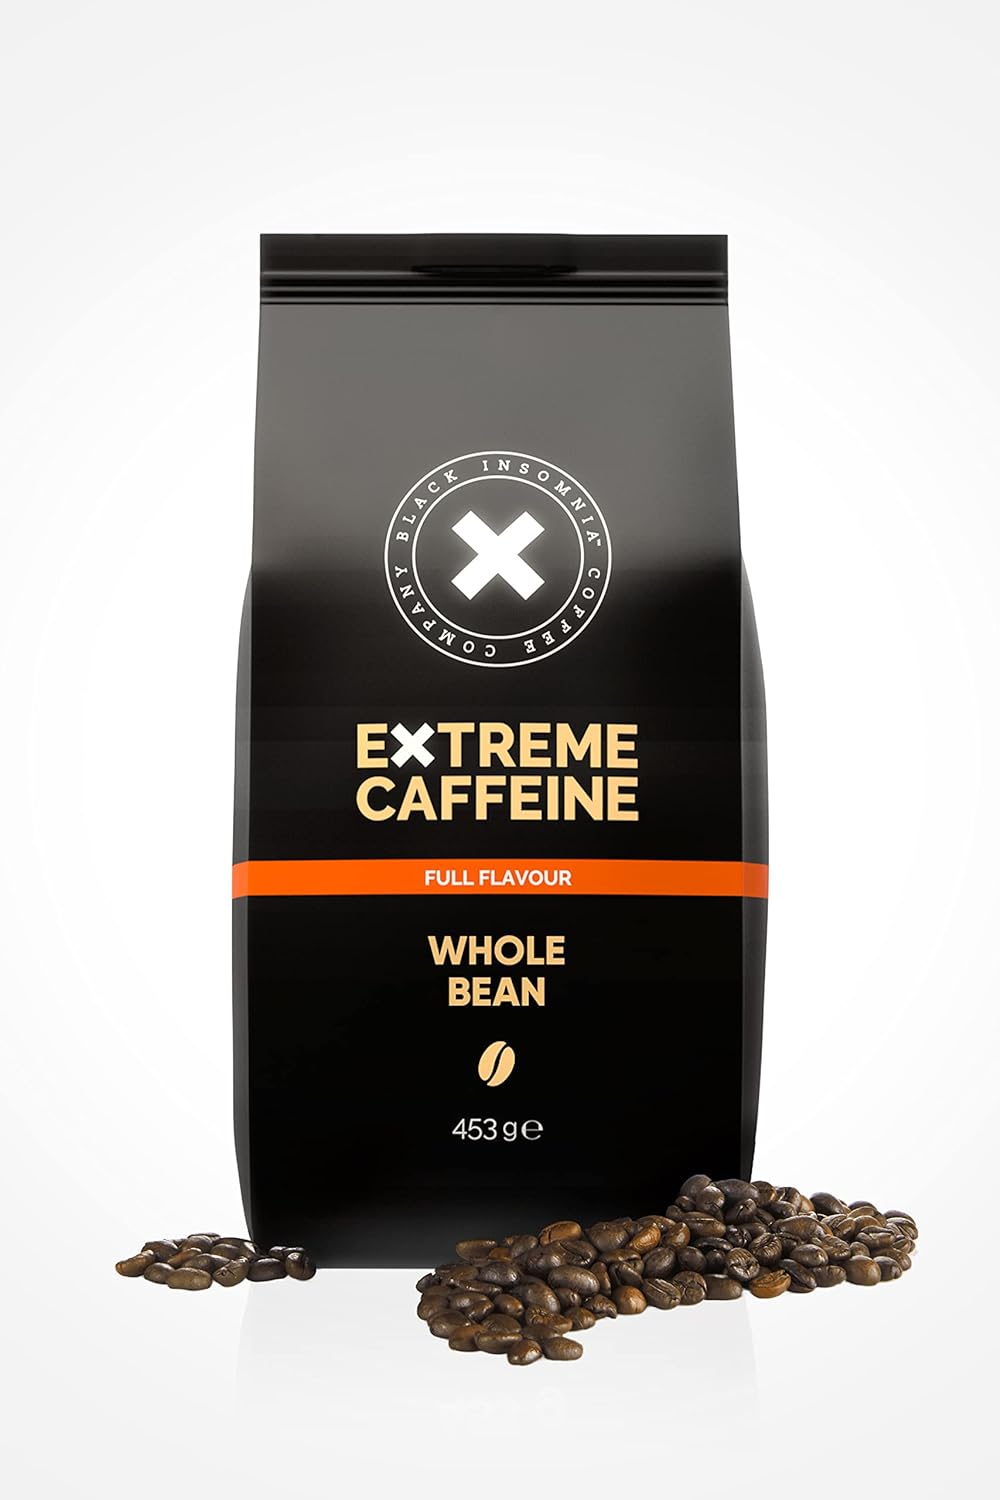 Black Insomnia Coffee Beans Extra Strong I 1105mg Caffeine Per Cup - Strongest Coffee in the World I 100% Robusta Coffee Beans I Espresso Beans I Low Acid I Full Flavour, Dark Roast, 1 x 453g